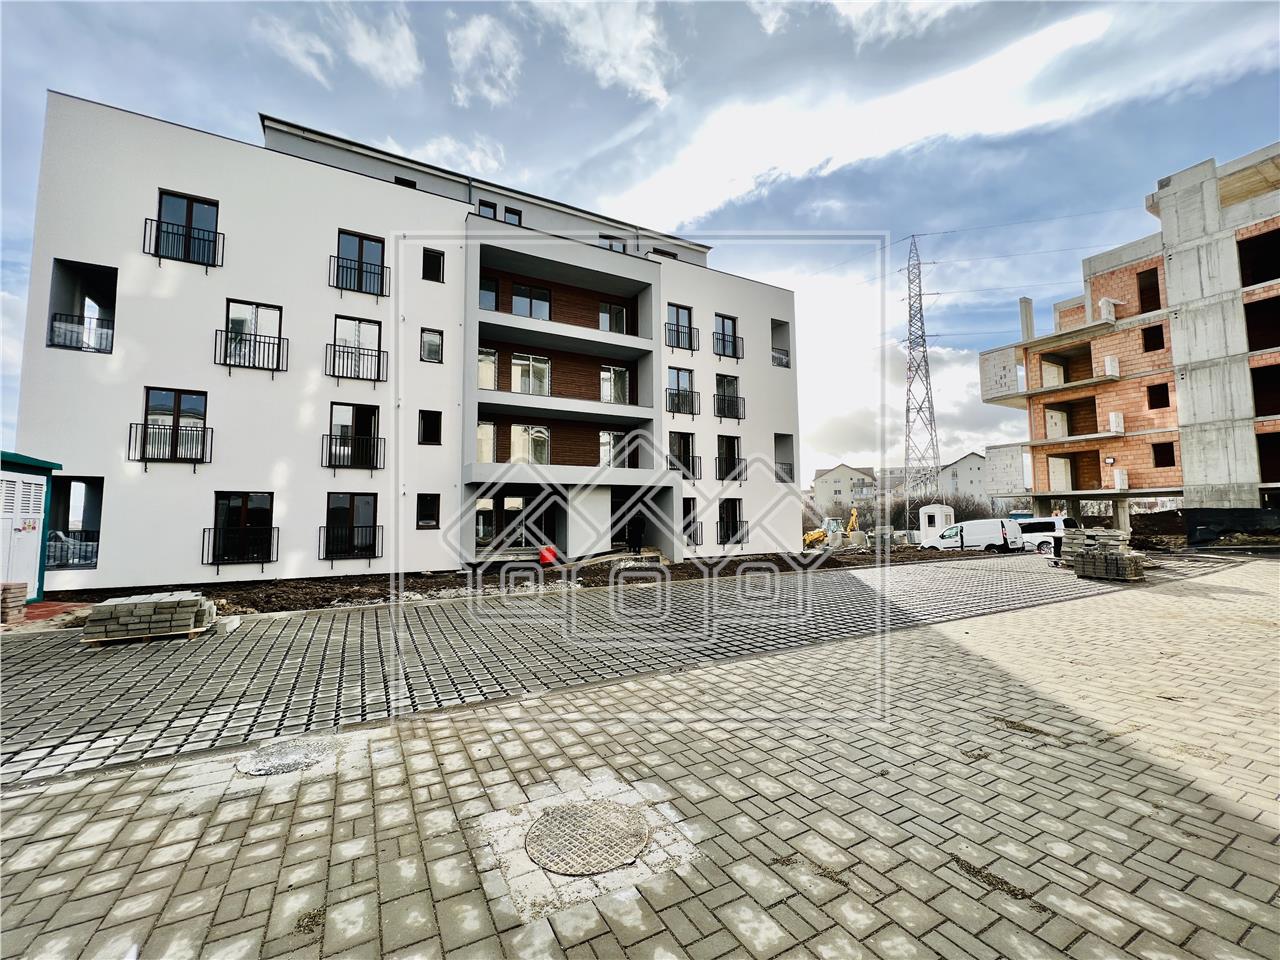 Apartment for sale in Sibiu - terrace 32 sqm-elevator and storage room